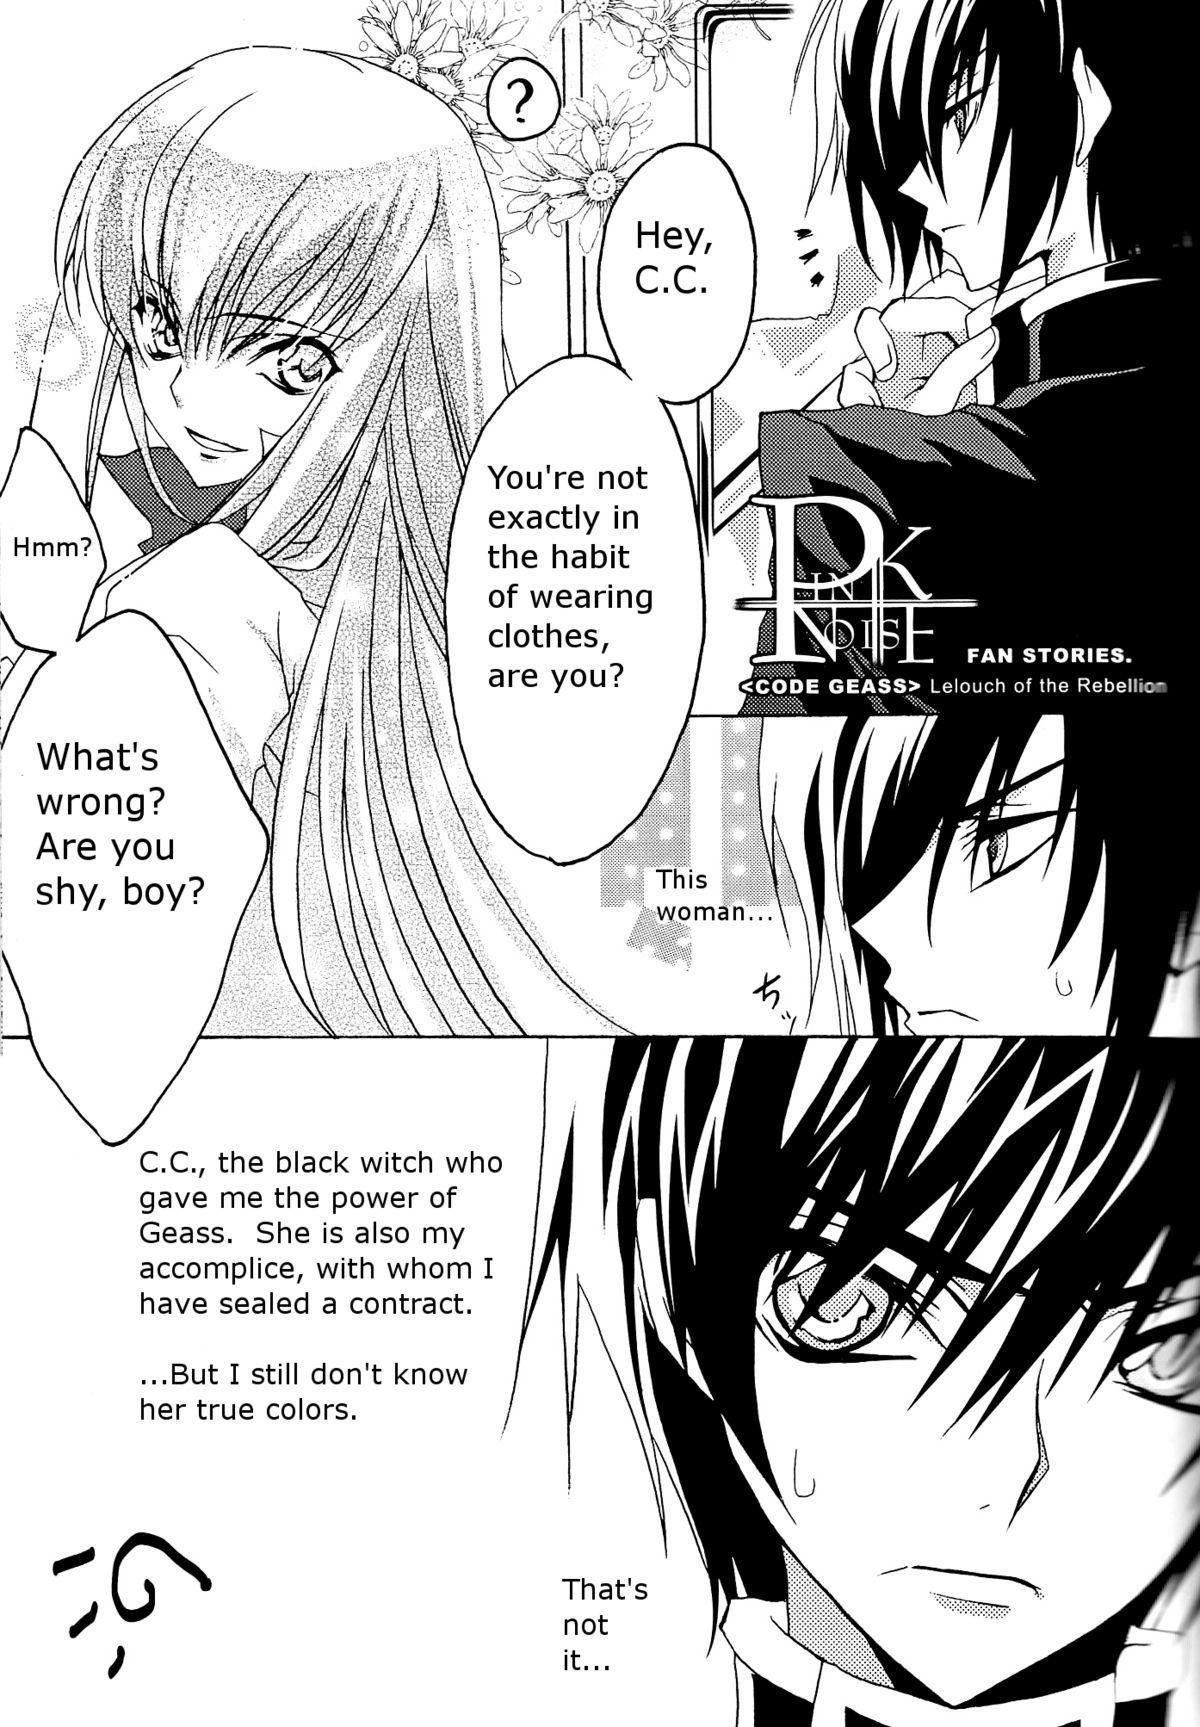 Latina Pink Noise - Code geass Que - Page 9